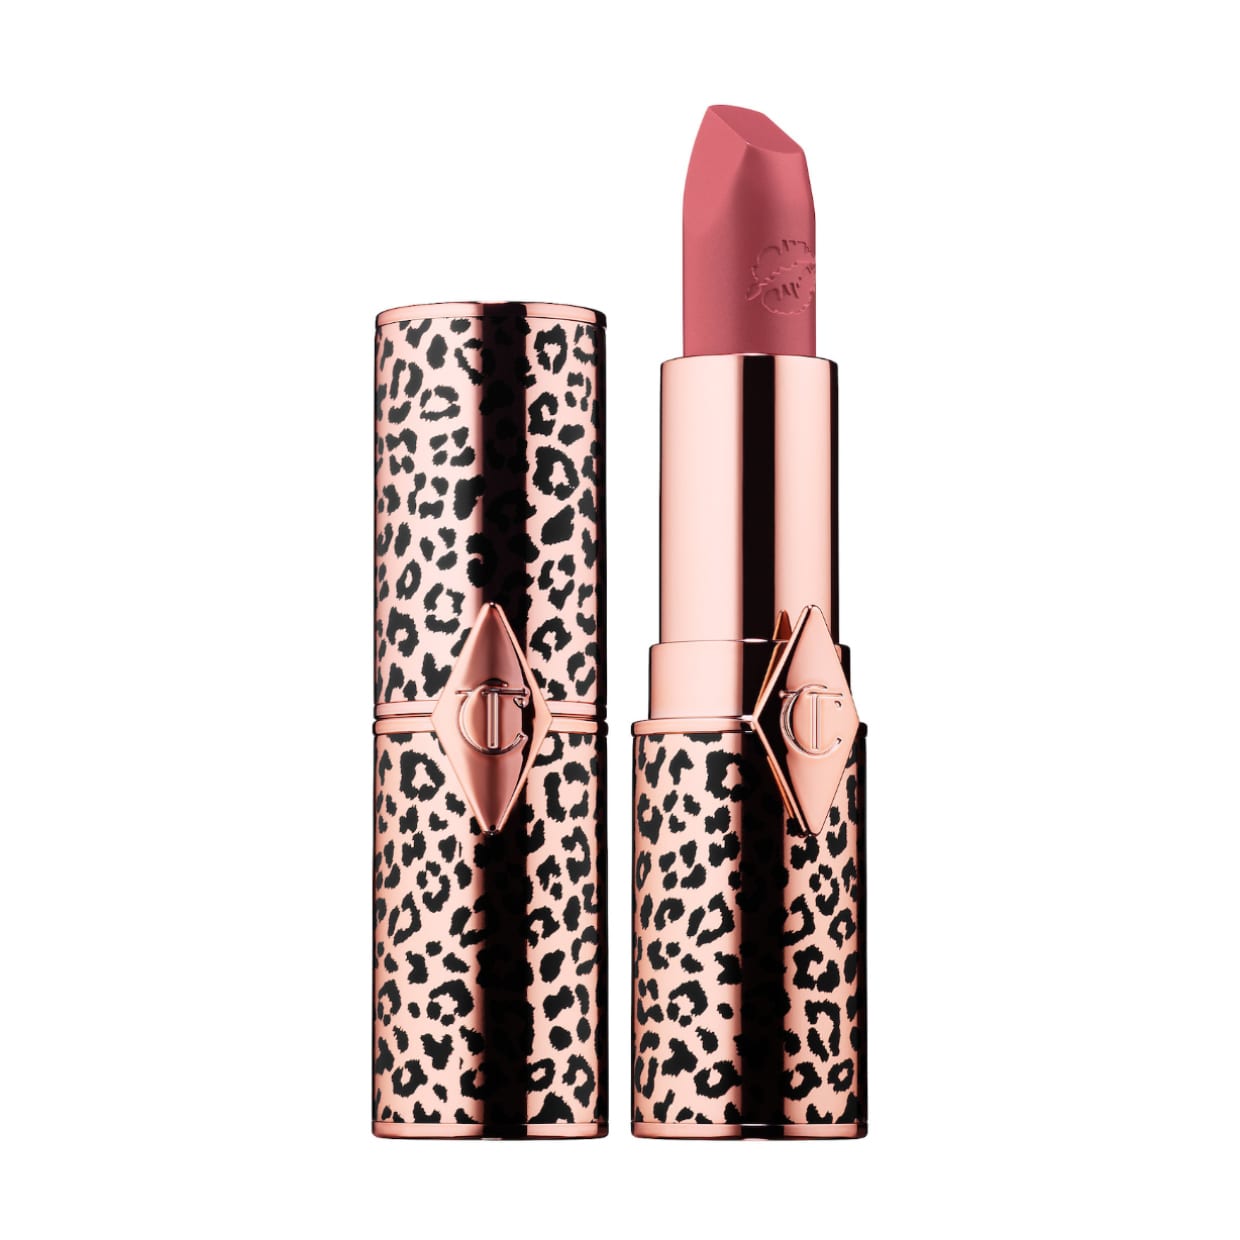 A gold leopard print tube of pink lipstick.